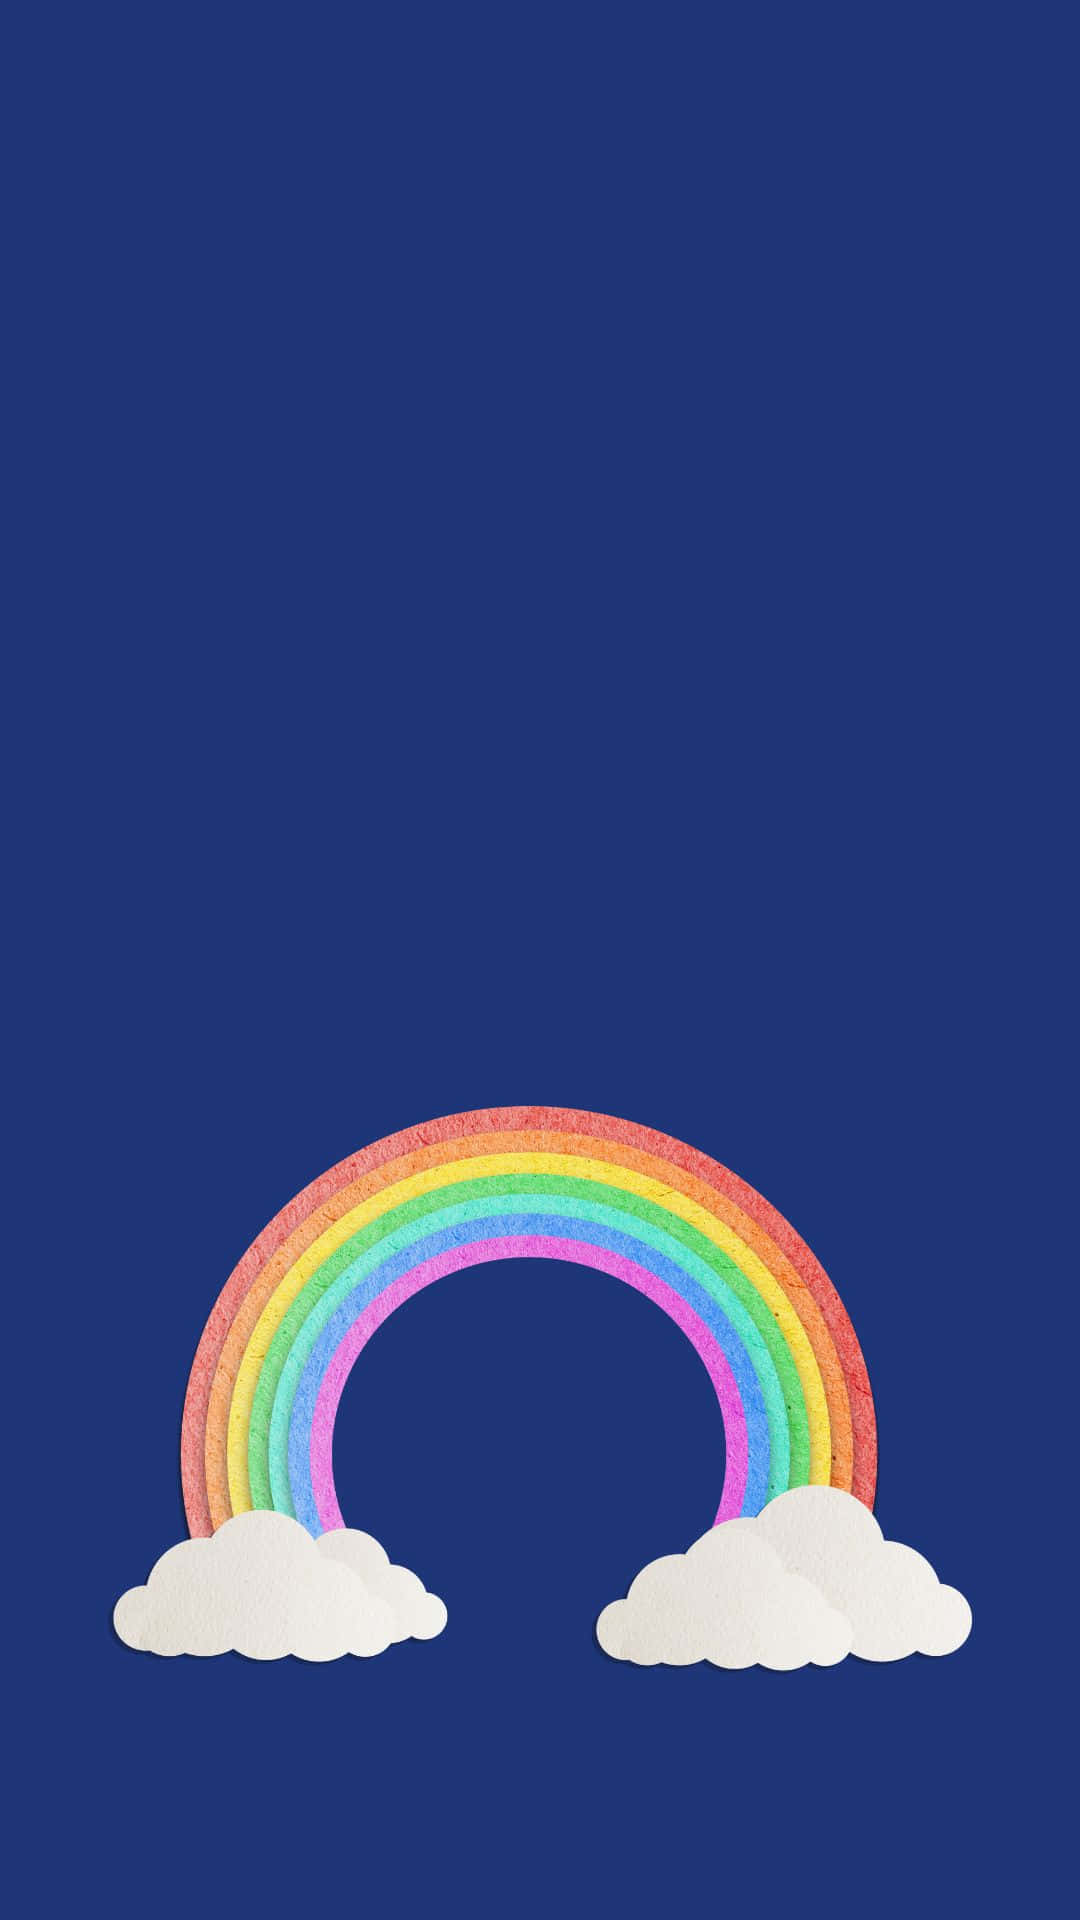 A Rainbow With Clouds On A Blue Background Background